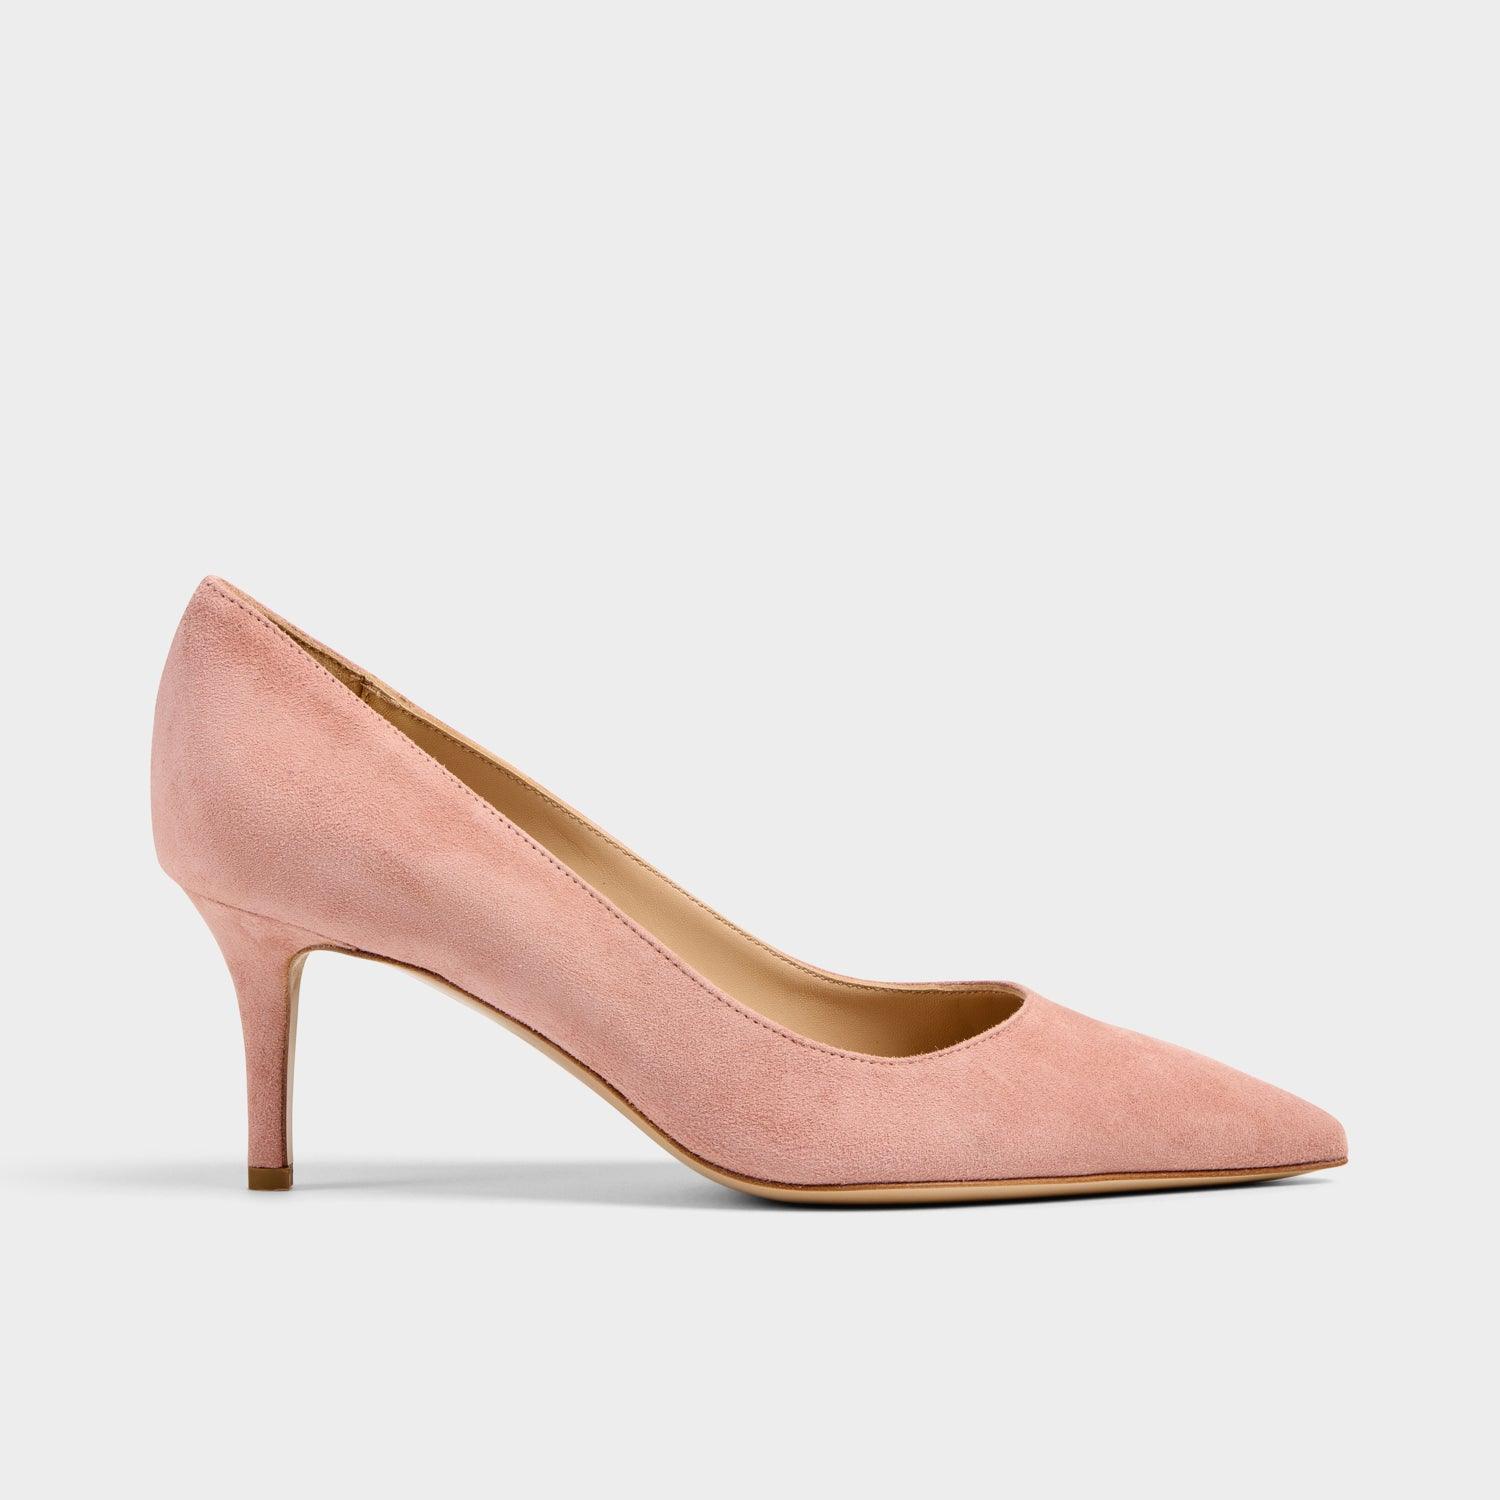 Milly Clay pink suede heel - MADE THE EDIT